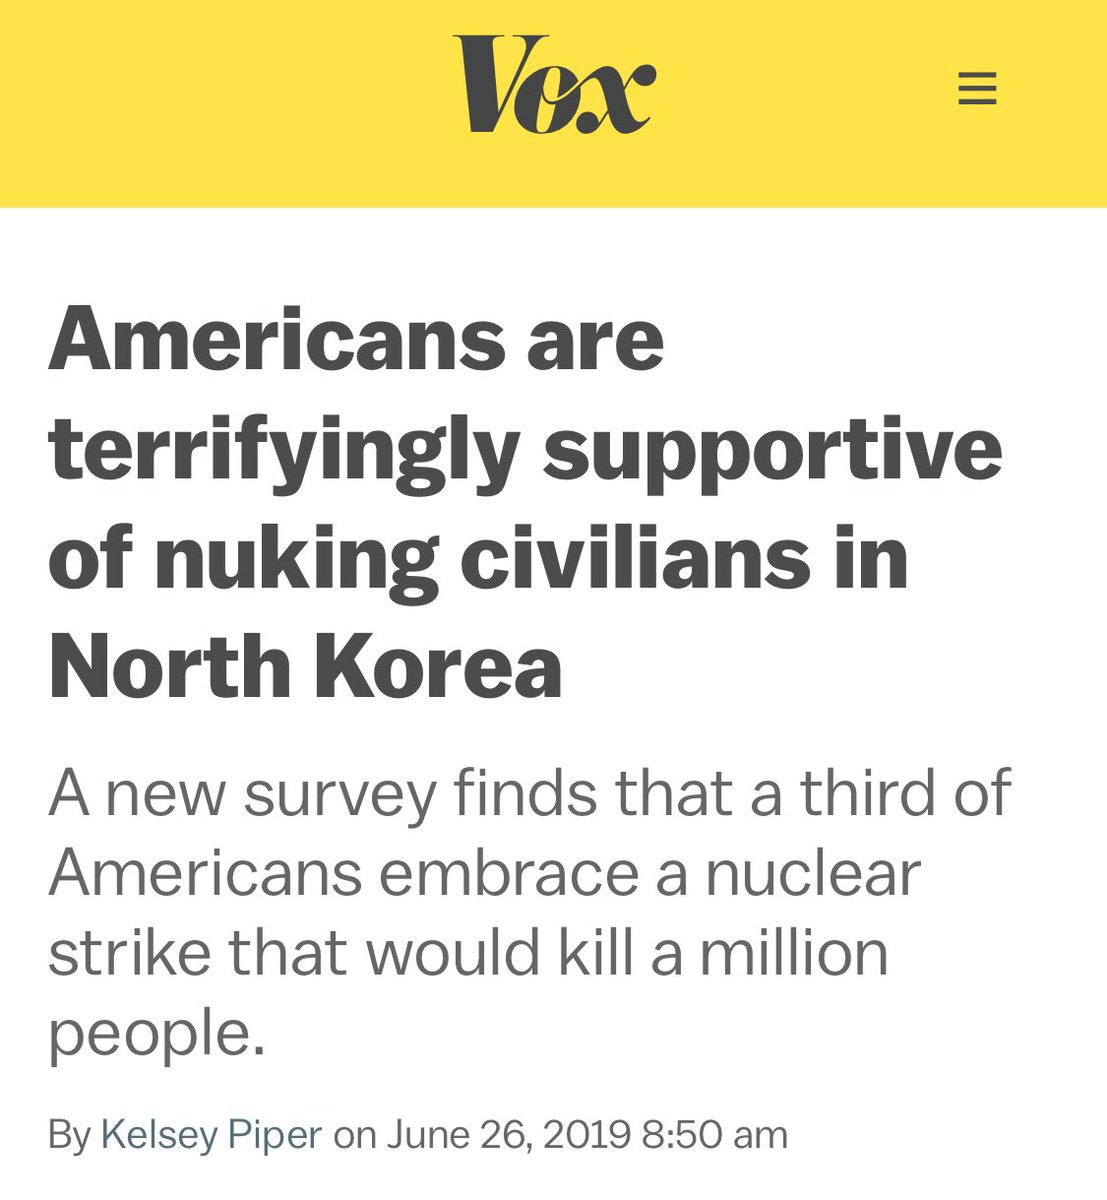 1/3rd would support nuking 1 mio ppl to death. this planet is gonna explode soon if we don't do anything about this